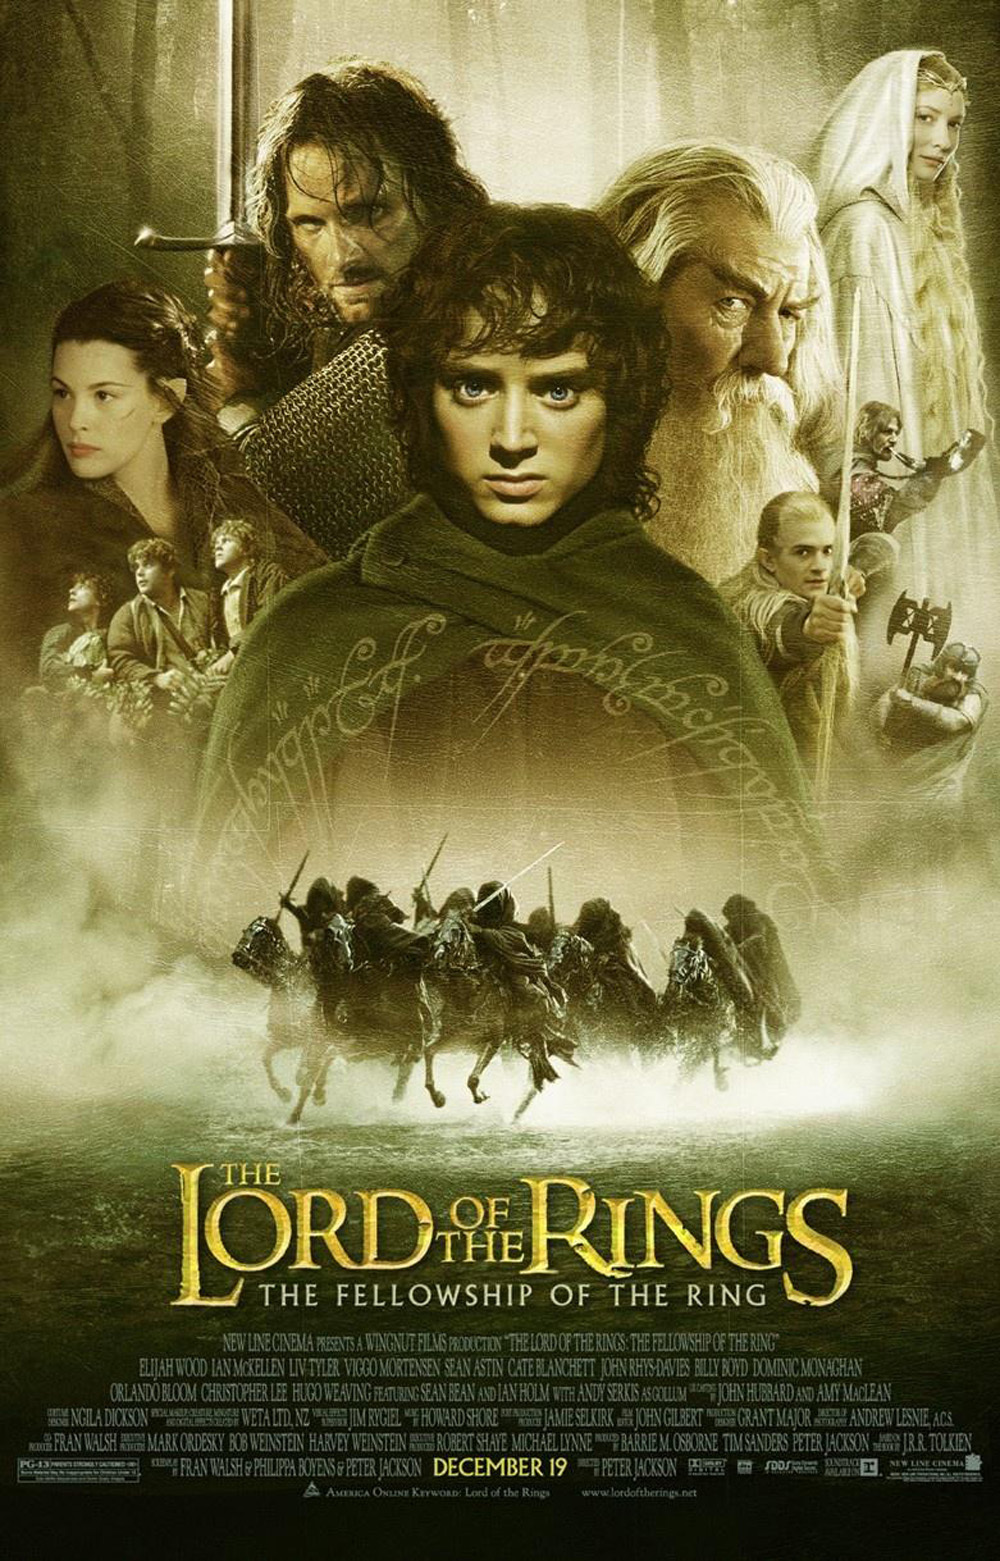 Lord of the rings, the fellowship of the ring (Motion picture)